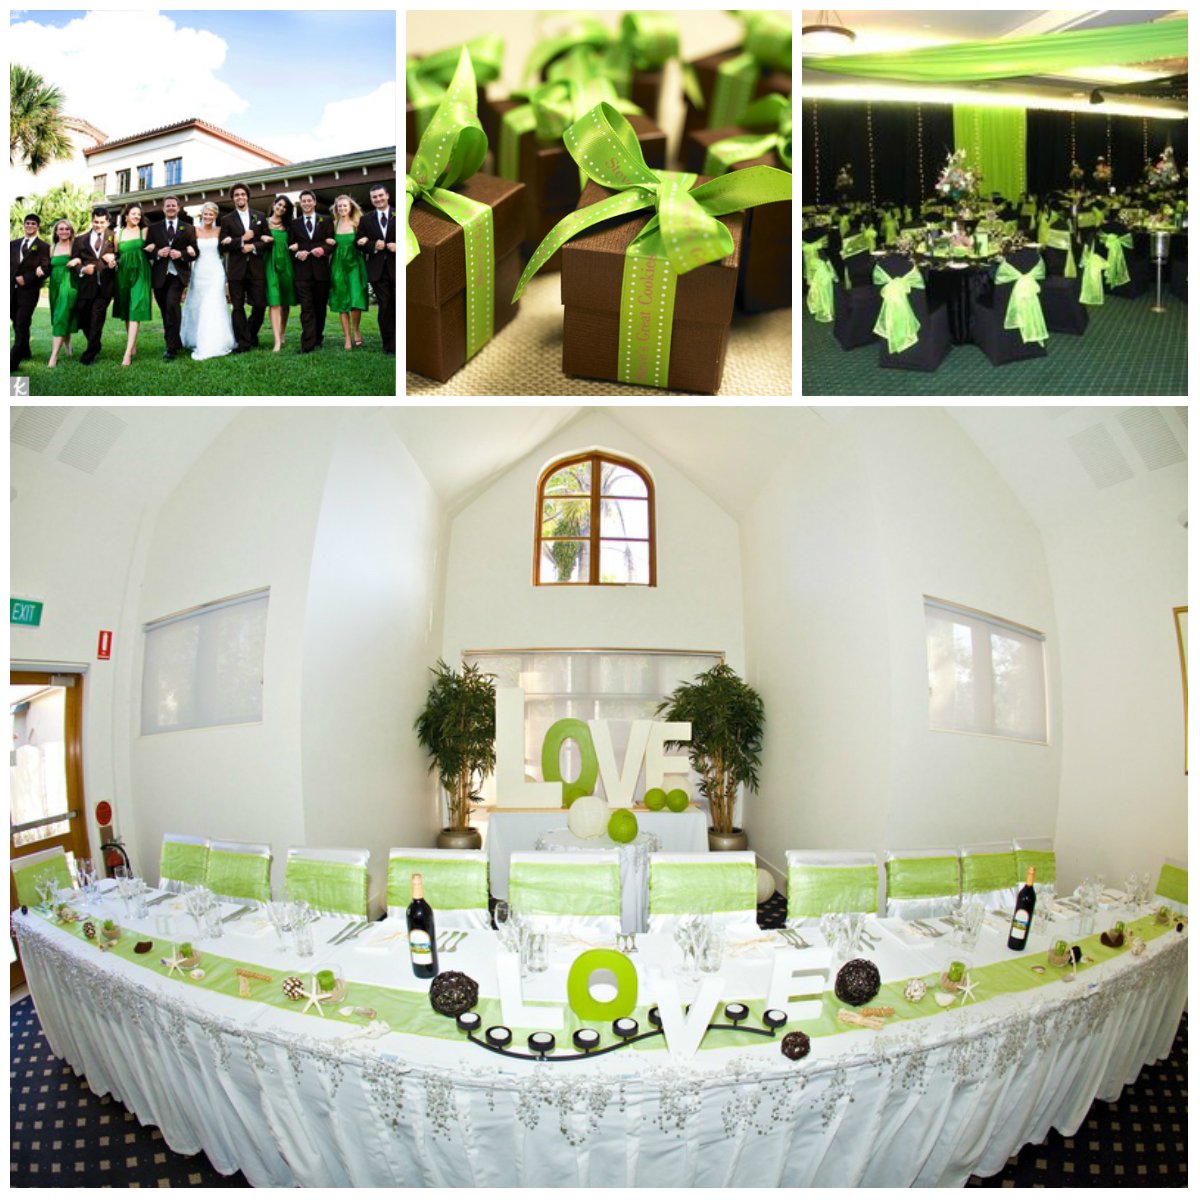 Wedding In Green Design From A To Z